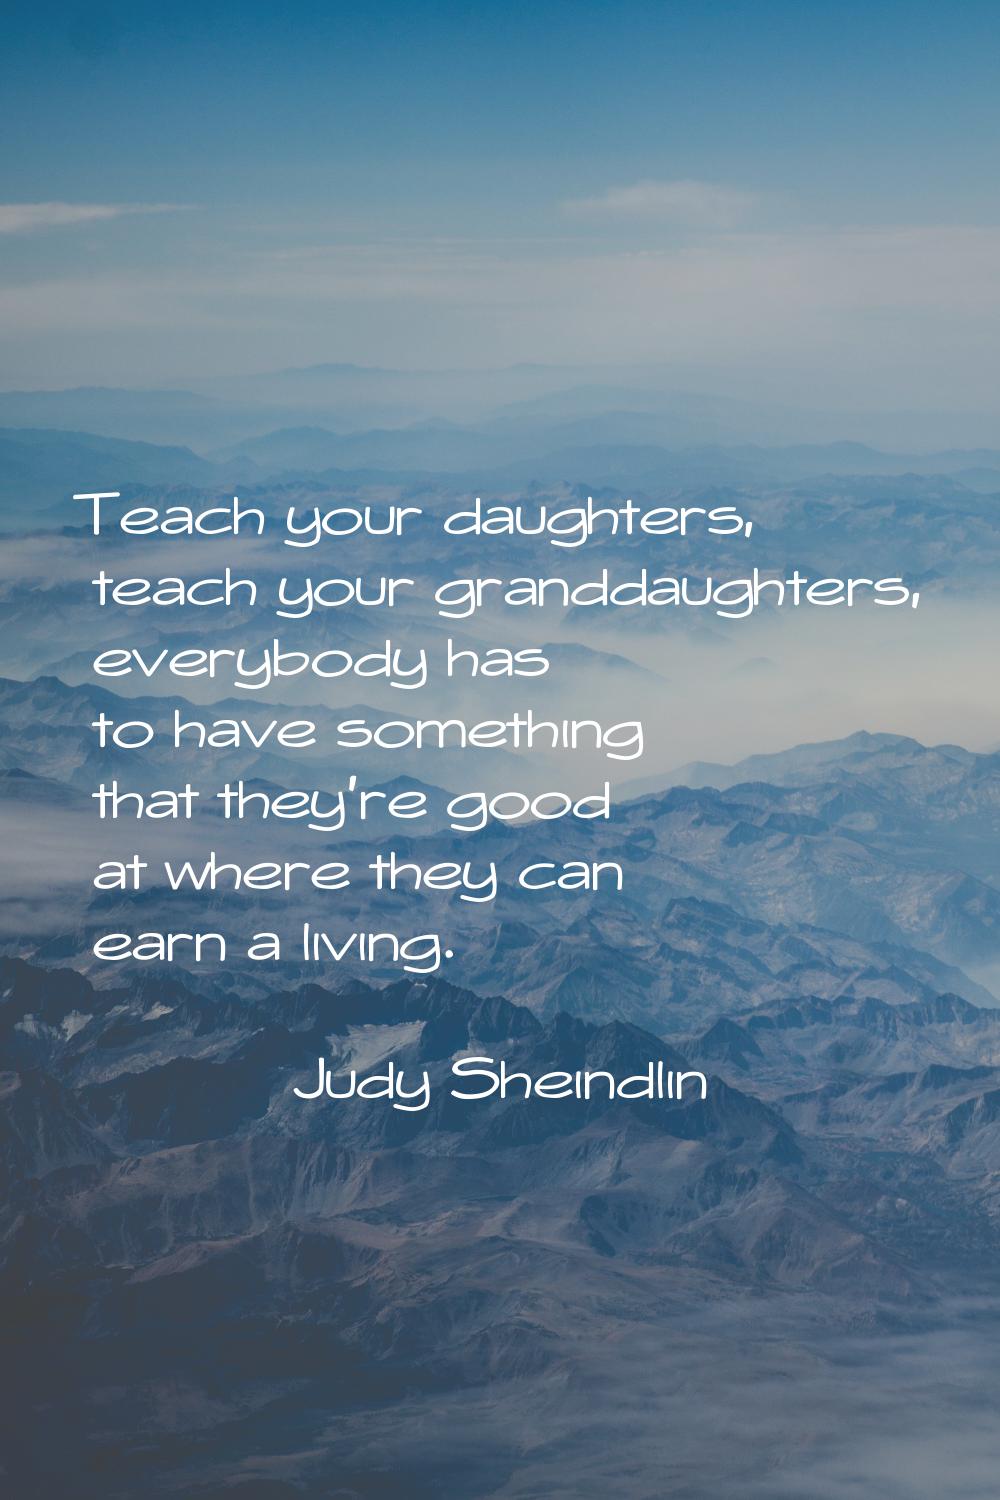 Teach your daughters, teach your granddaughters, everybody has to have something that they're good 